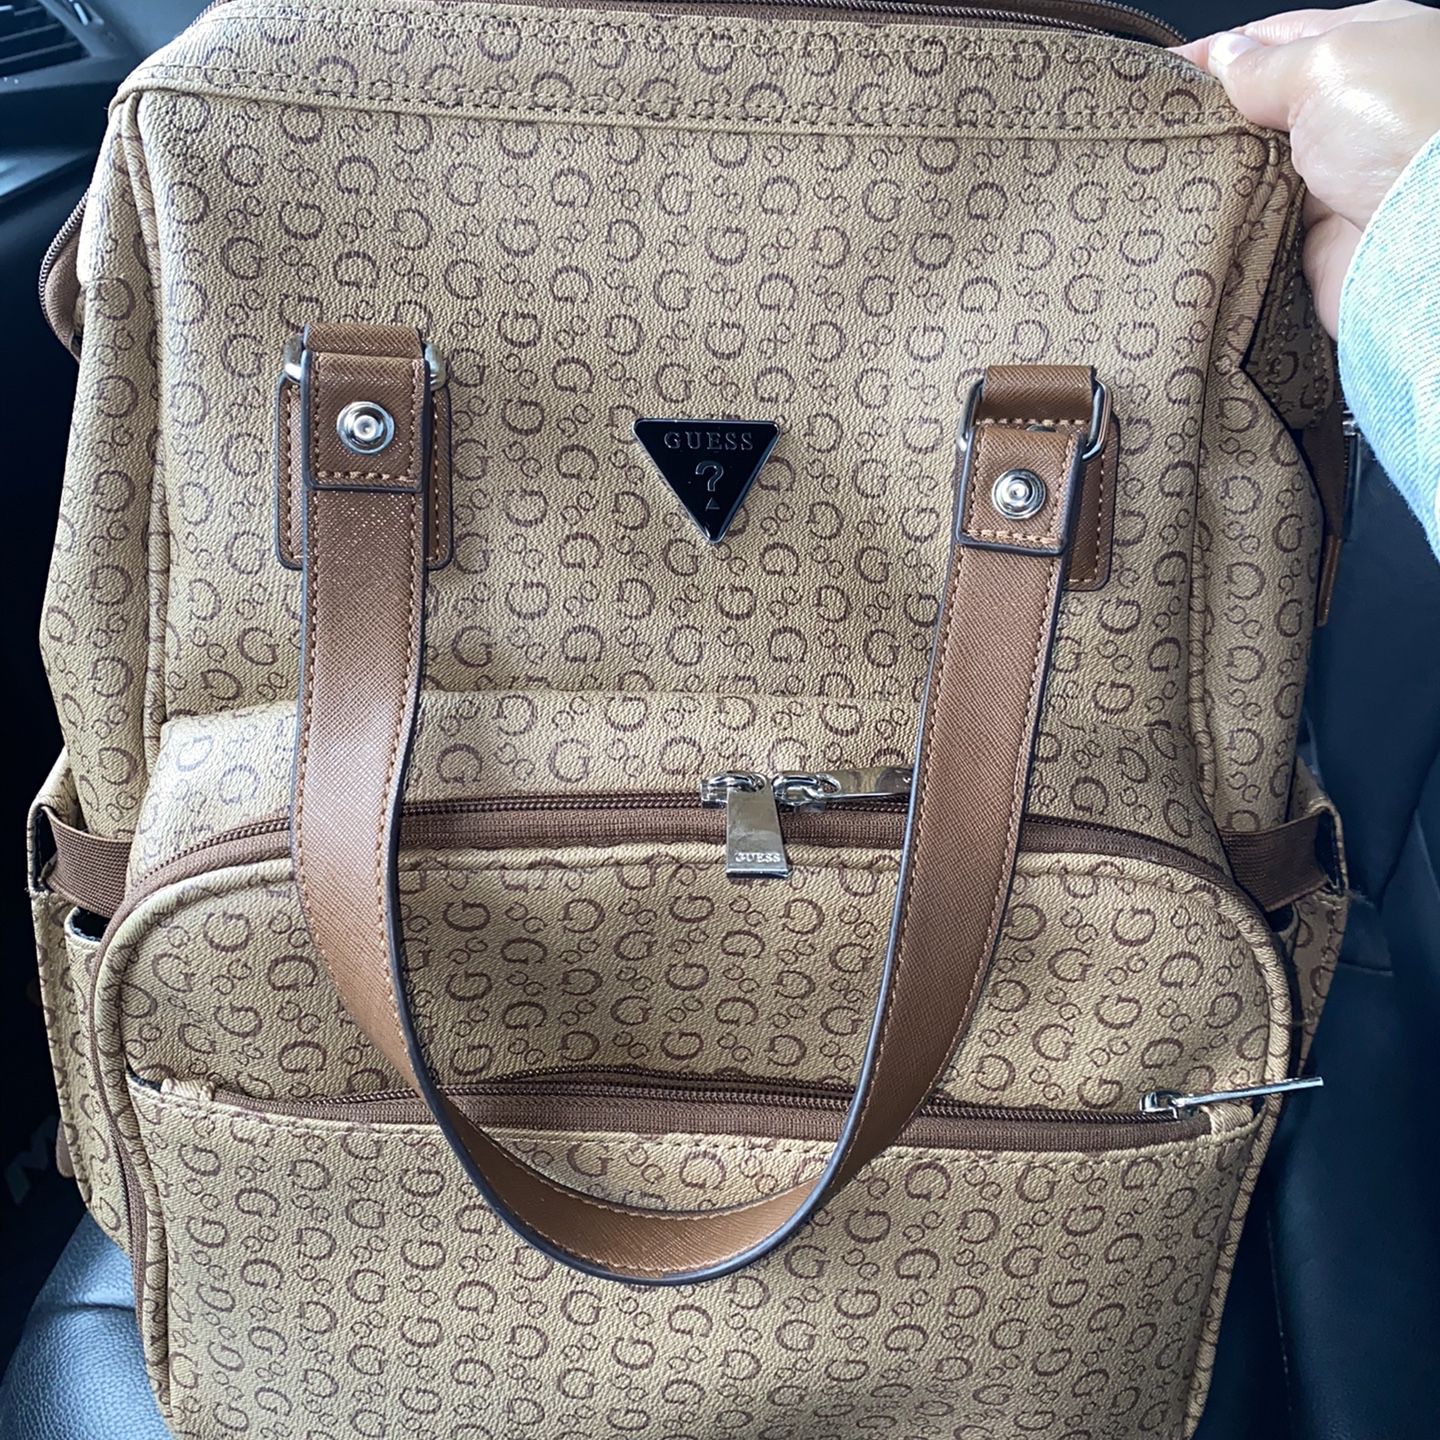 Guess Diaper Bag/backpack for Sale in El Monte, CA - OfferUp